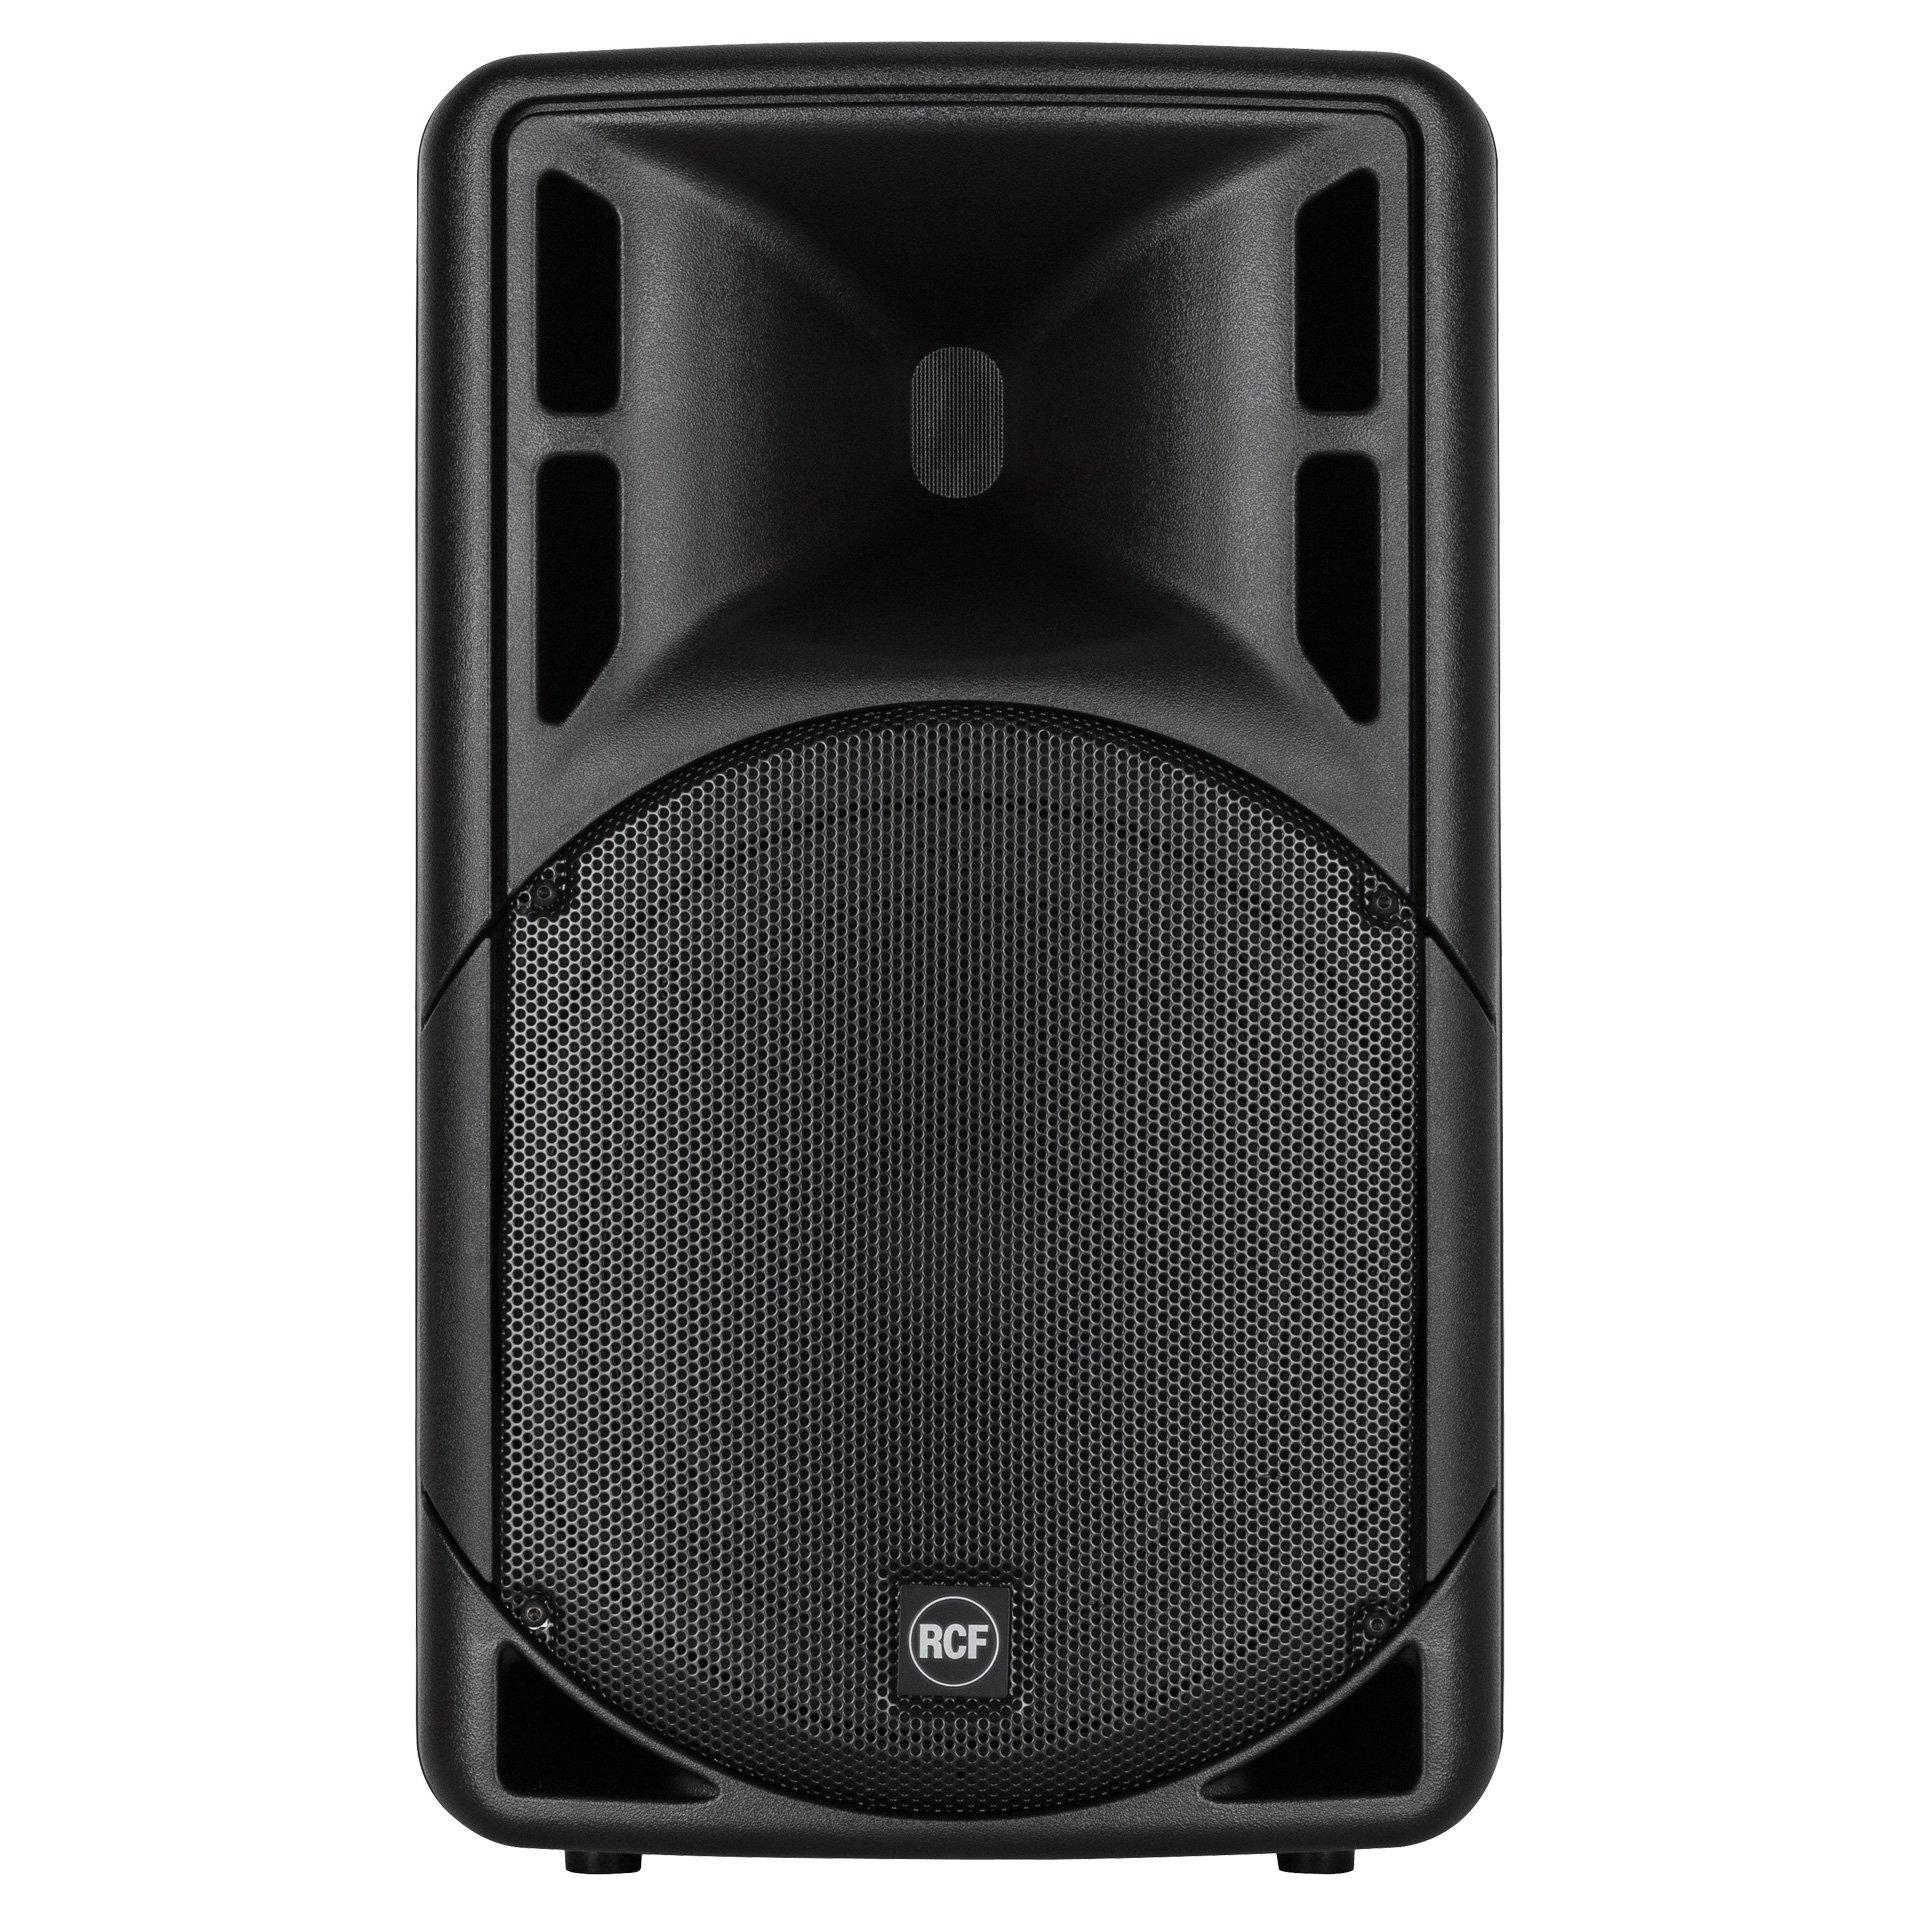 RCF Art 315 A MK4 Active Two Way Speaker front